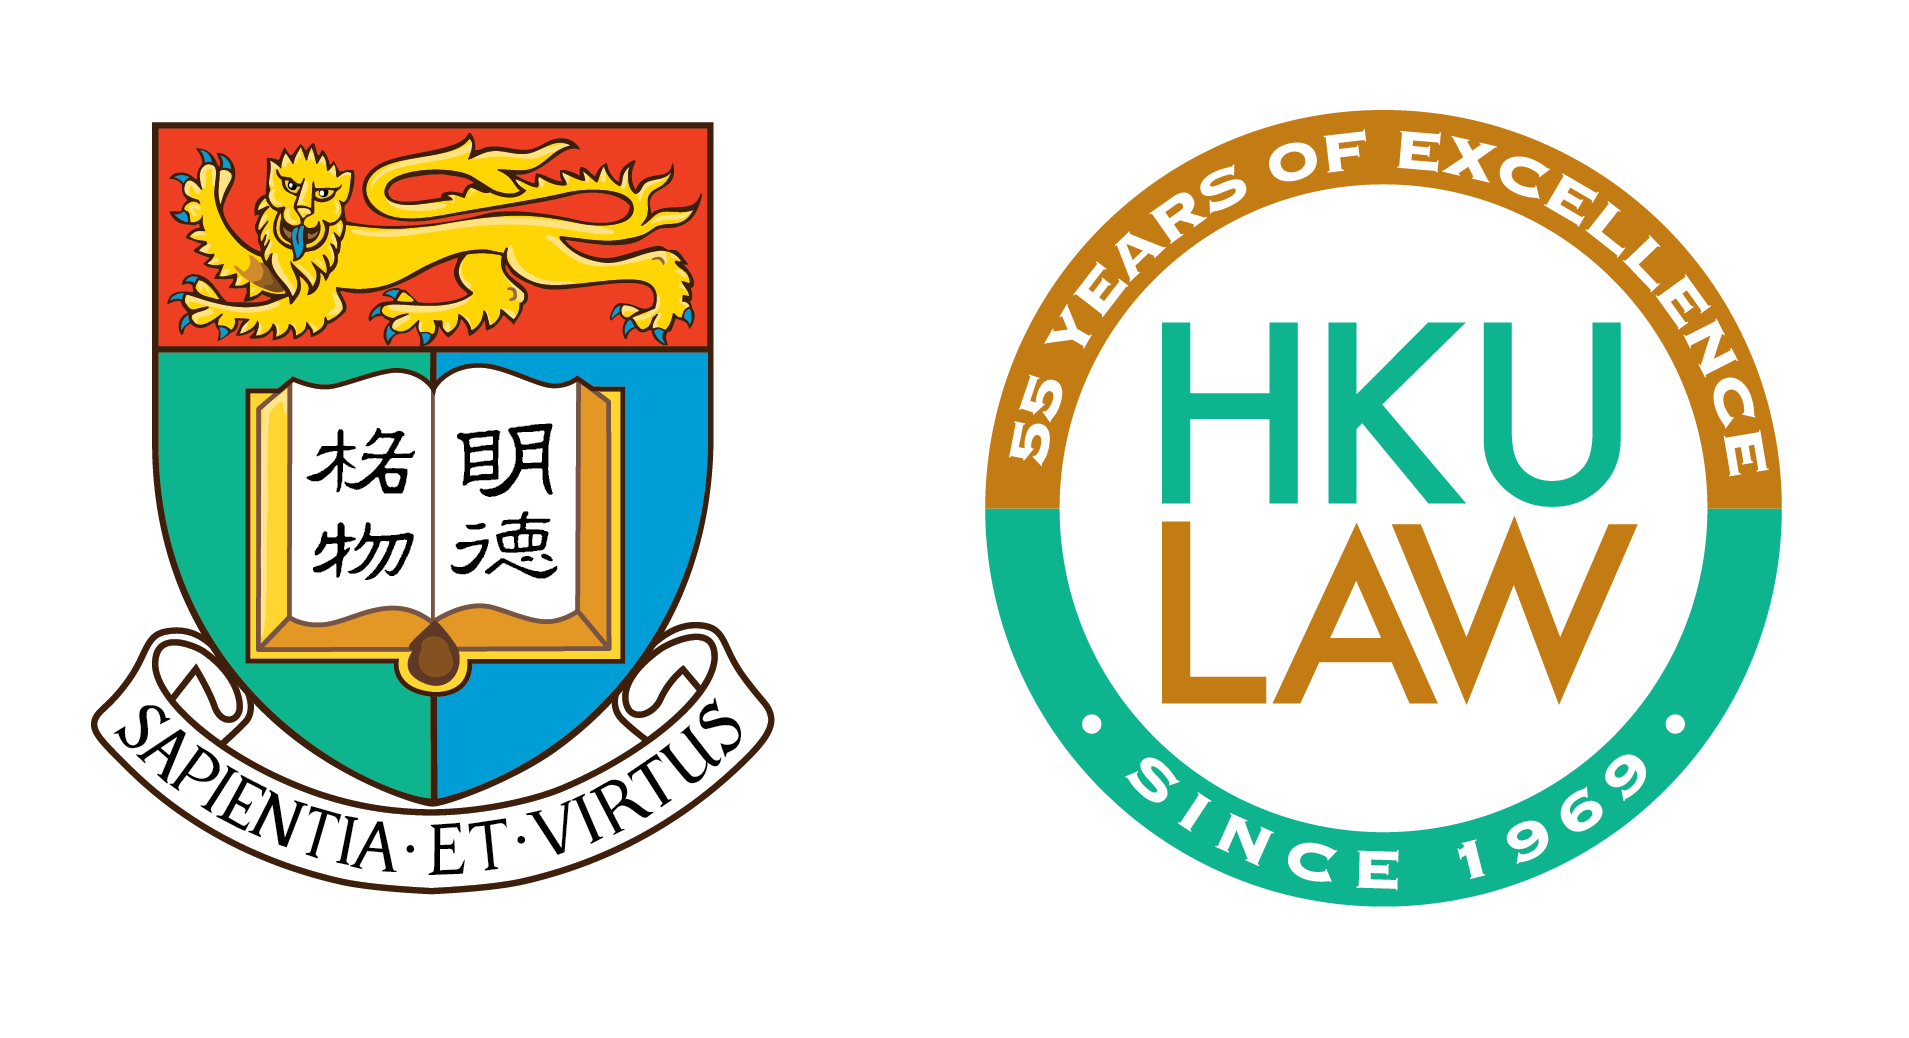 Faculty of Law footer logo